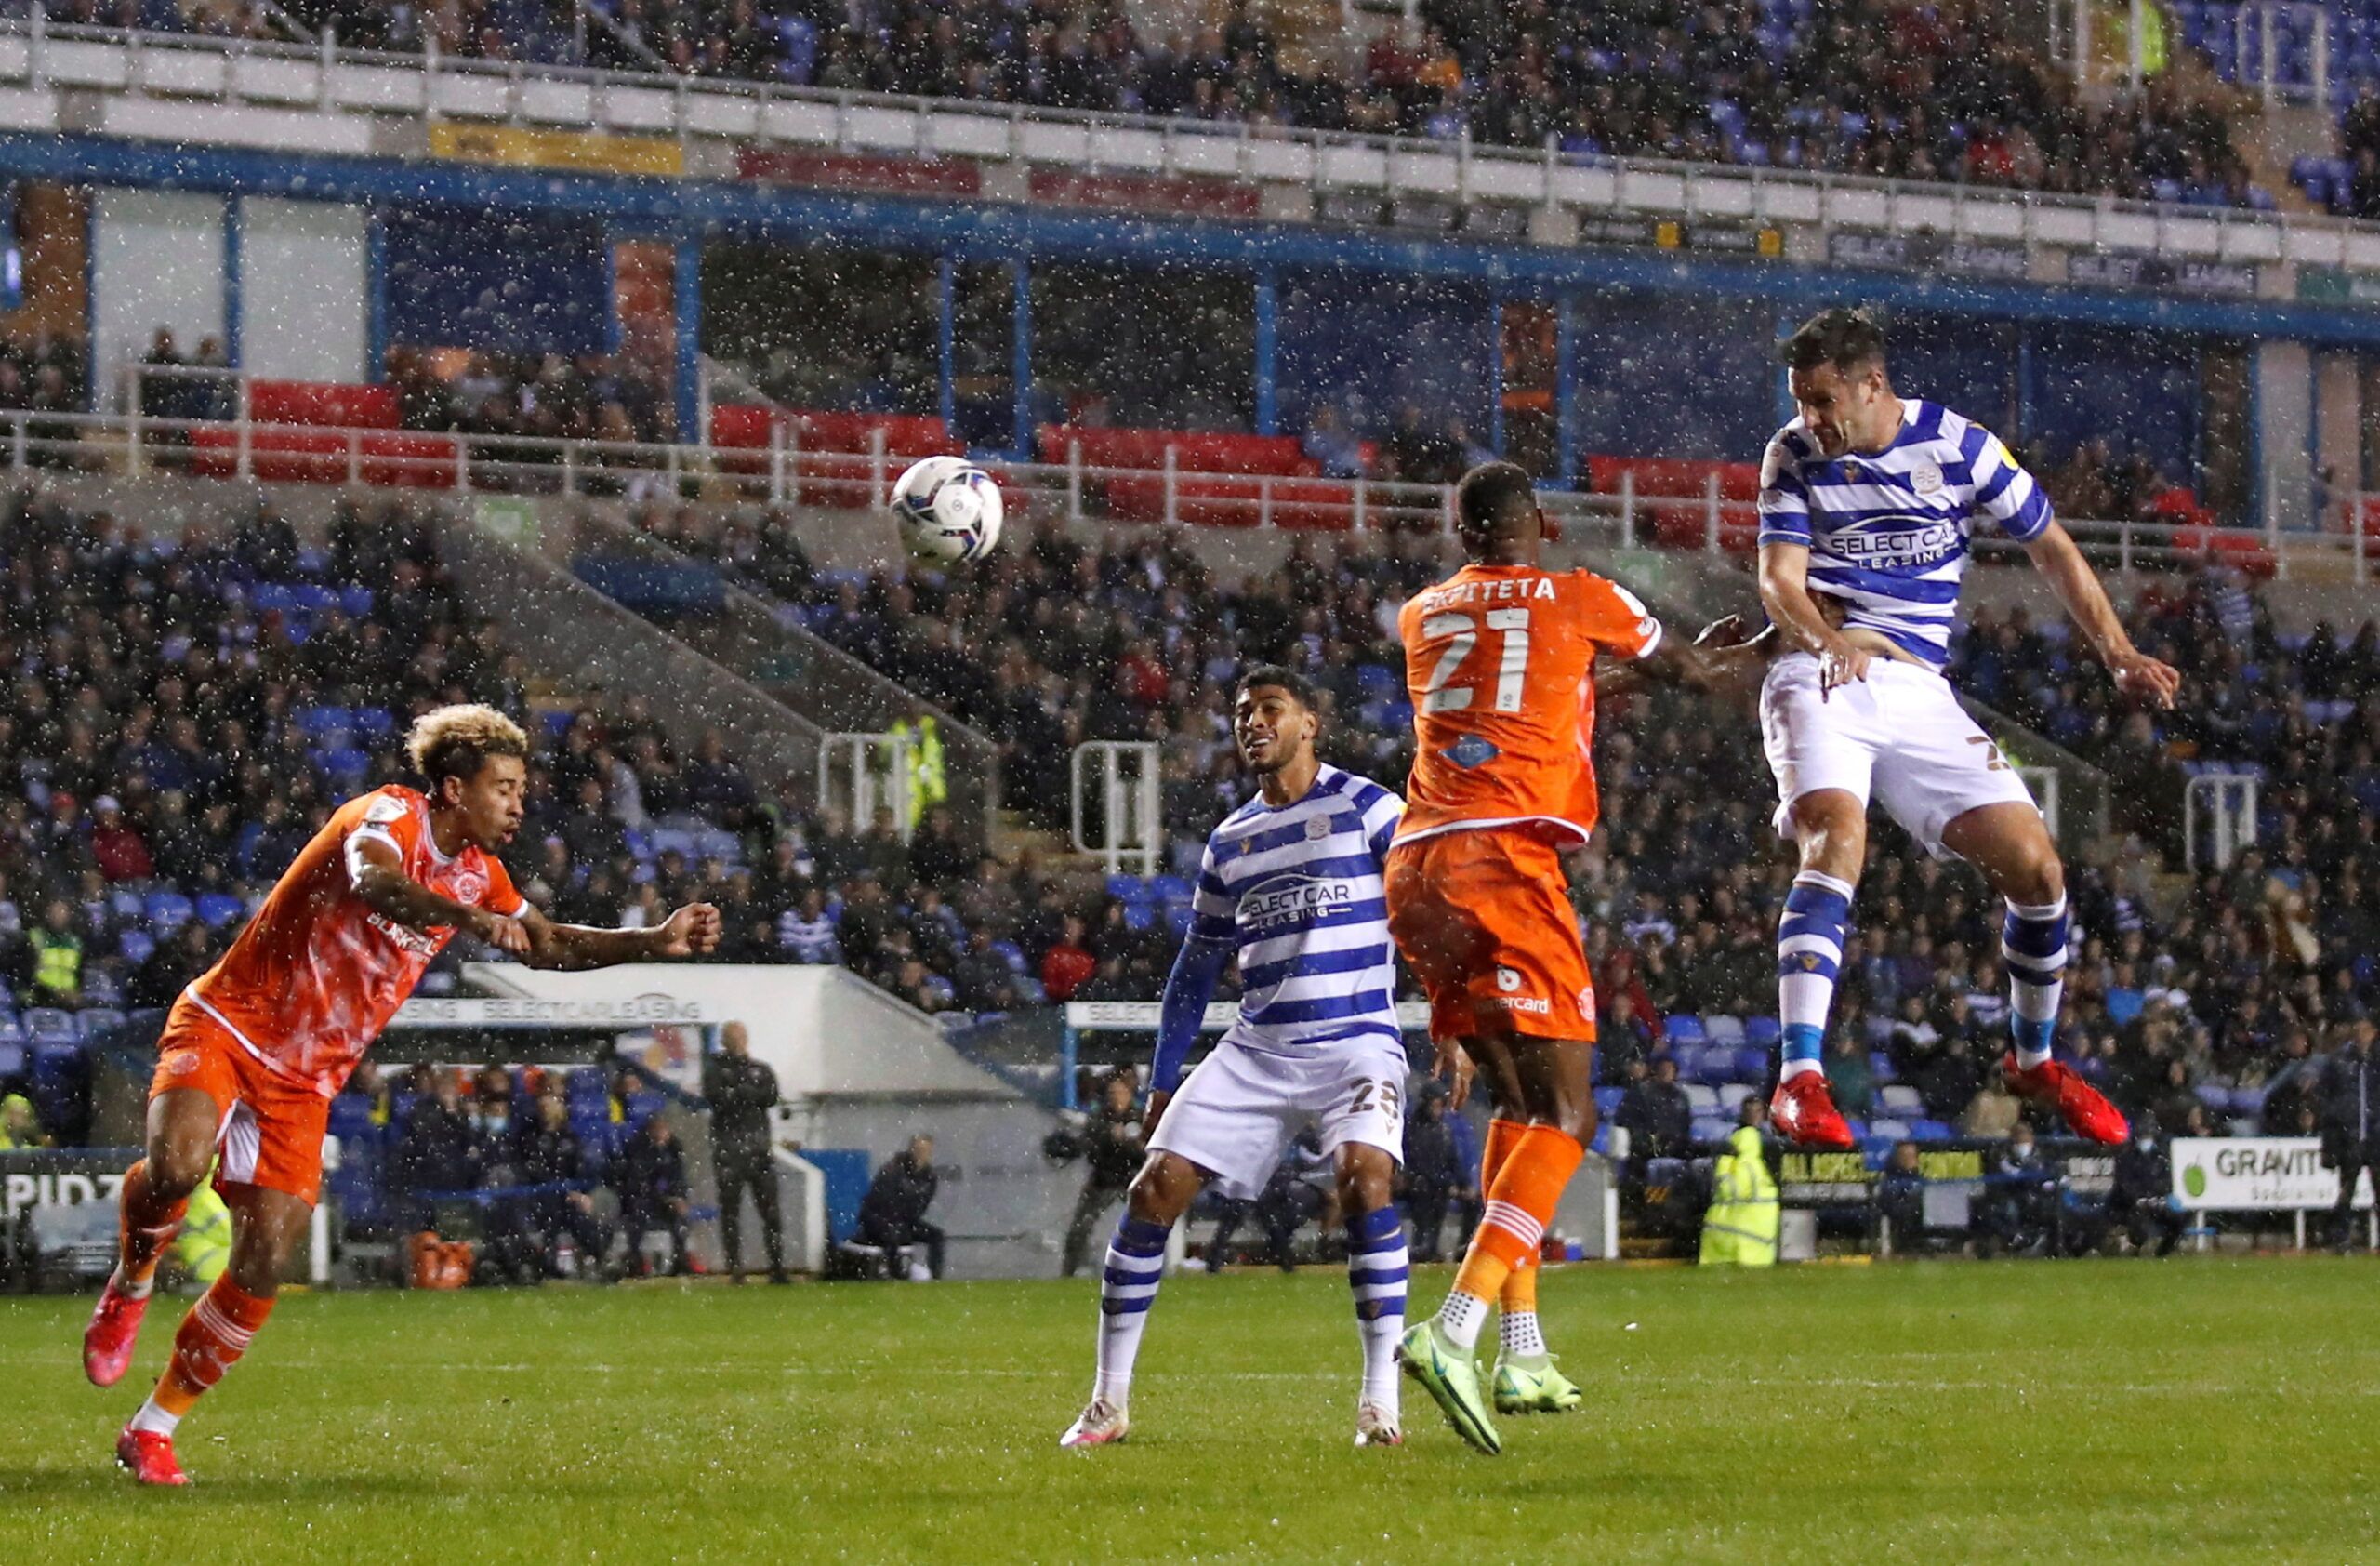 Soccer Football - Championship - Reading v Blackpool - Madejski Stadium, Reading, Britain - October 20, 2021 Reading's Scott Dann scores their first goal   Action Images/Andrew Boyers  EDITORIAL USE ONLY. No use with unauthorized audio, video, data, fixture lists, club/league logos or 